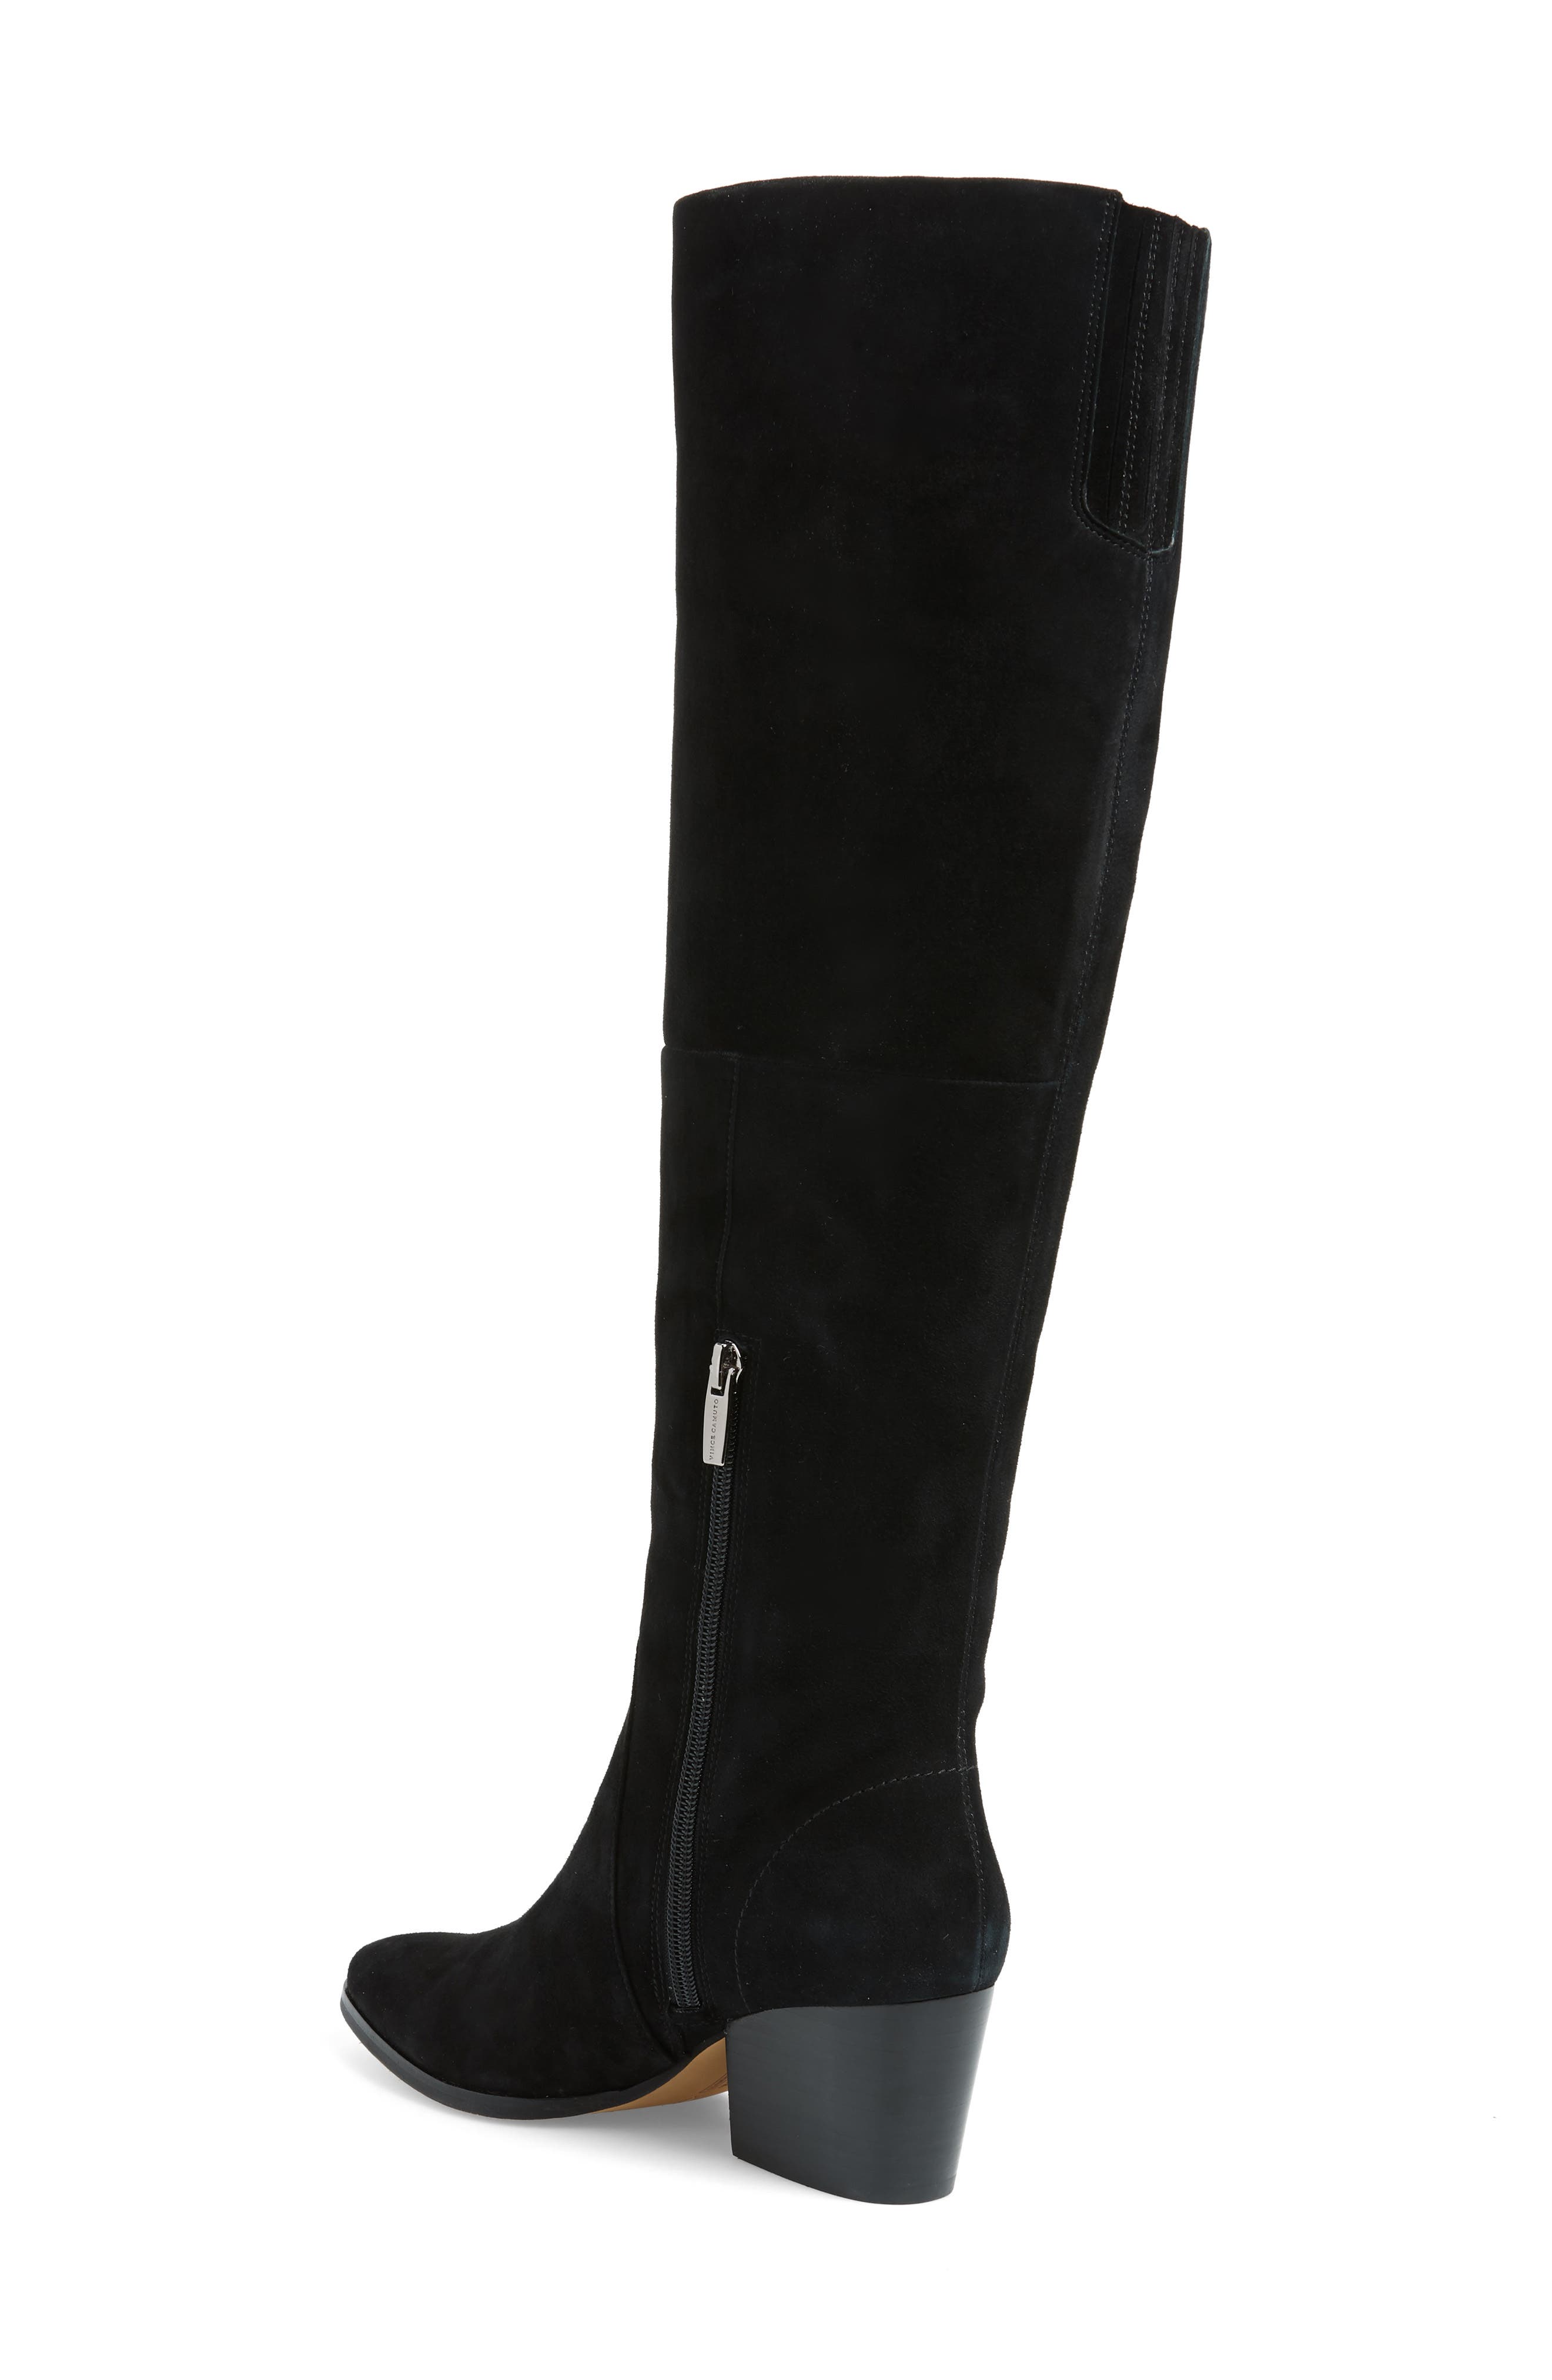 vince camuto black knee high boots